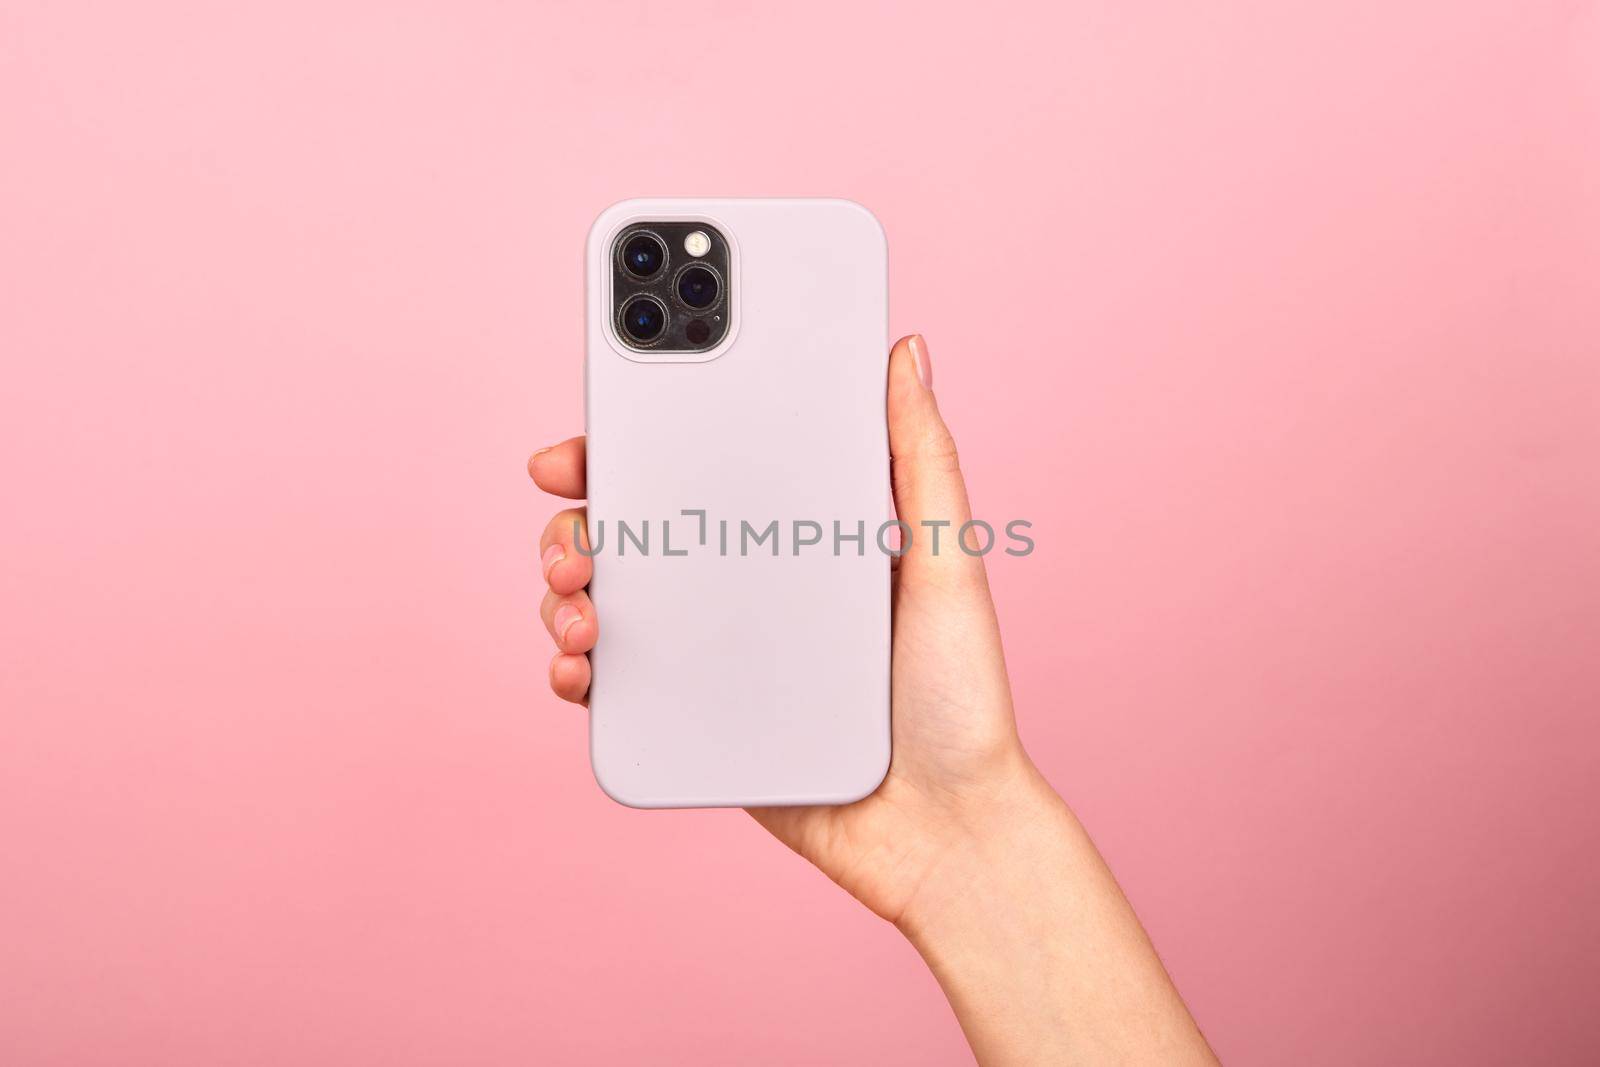 Hands holding a smartphone in a case by Demkat